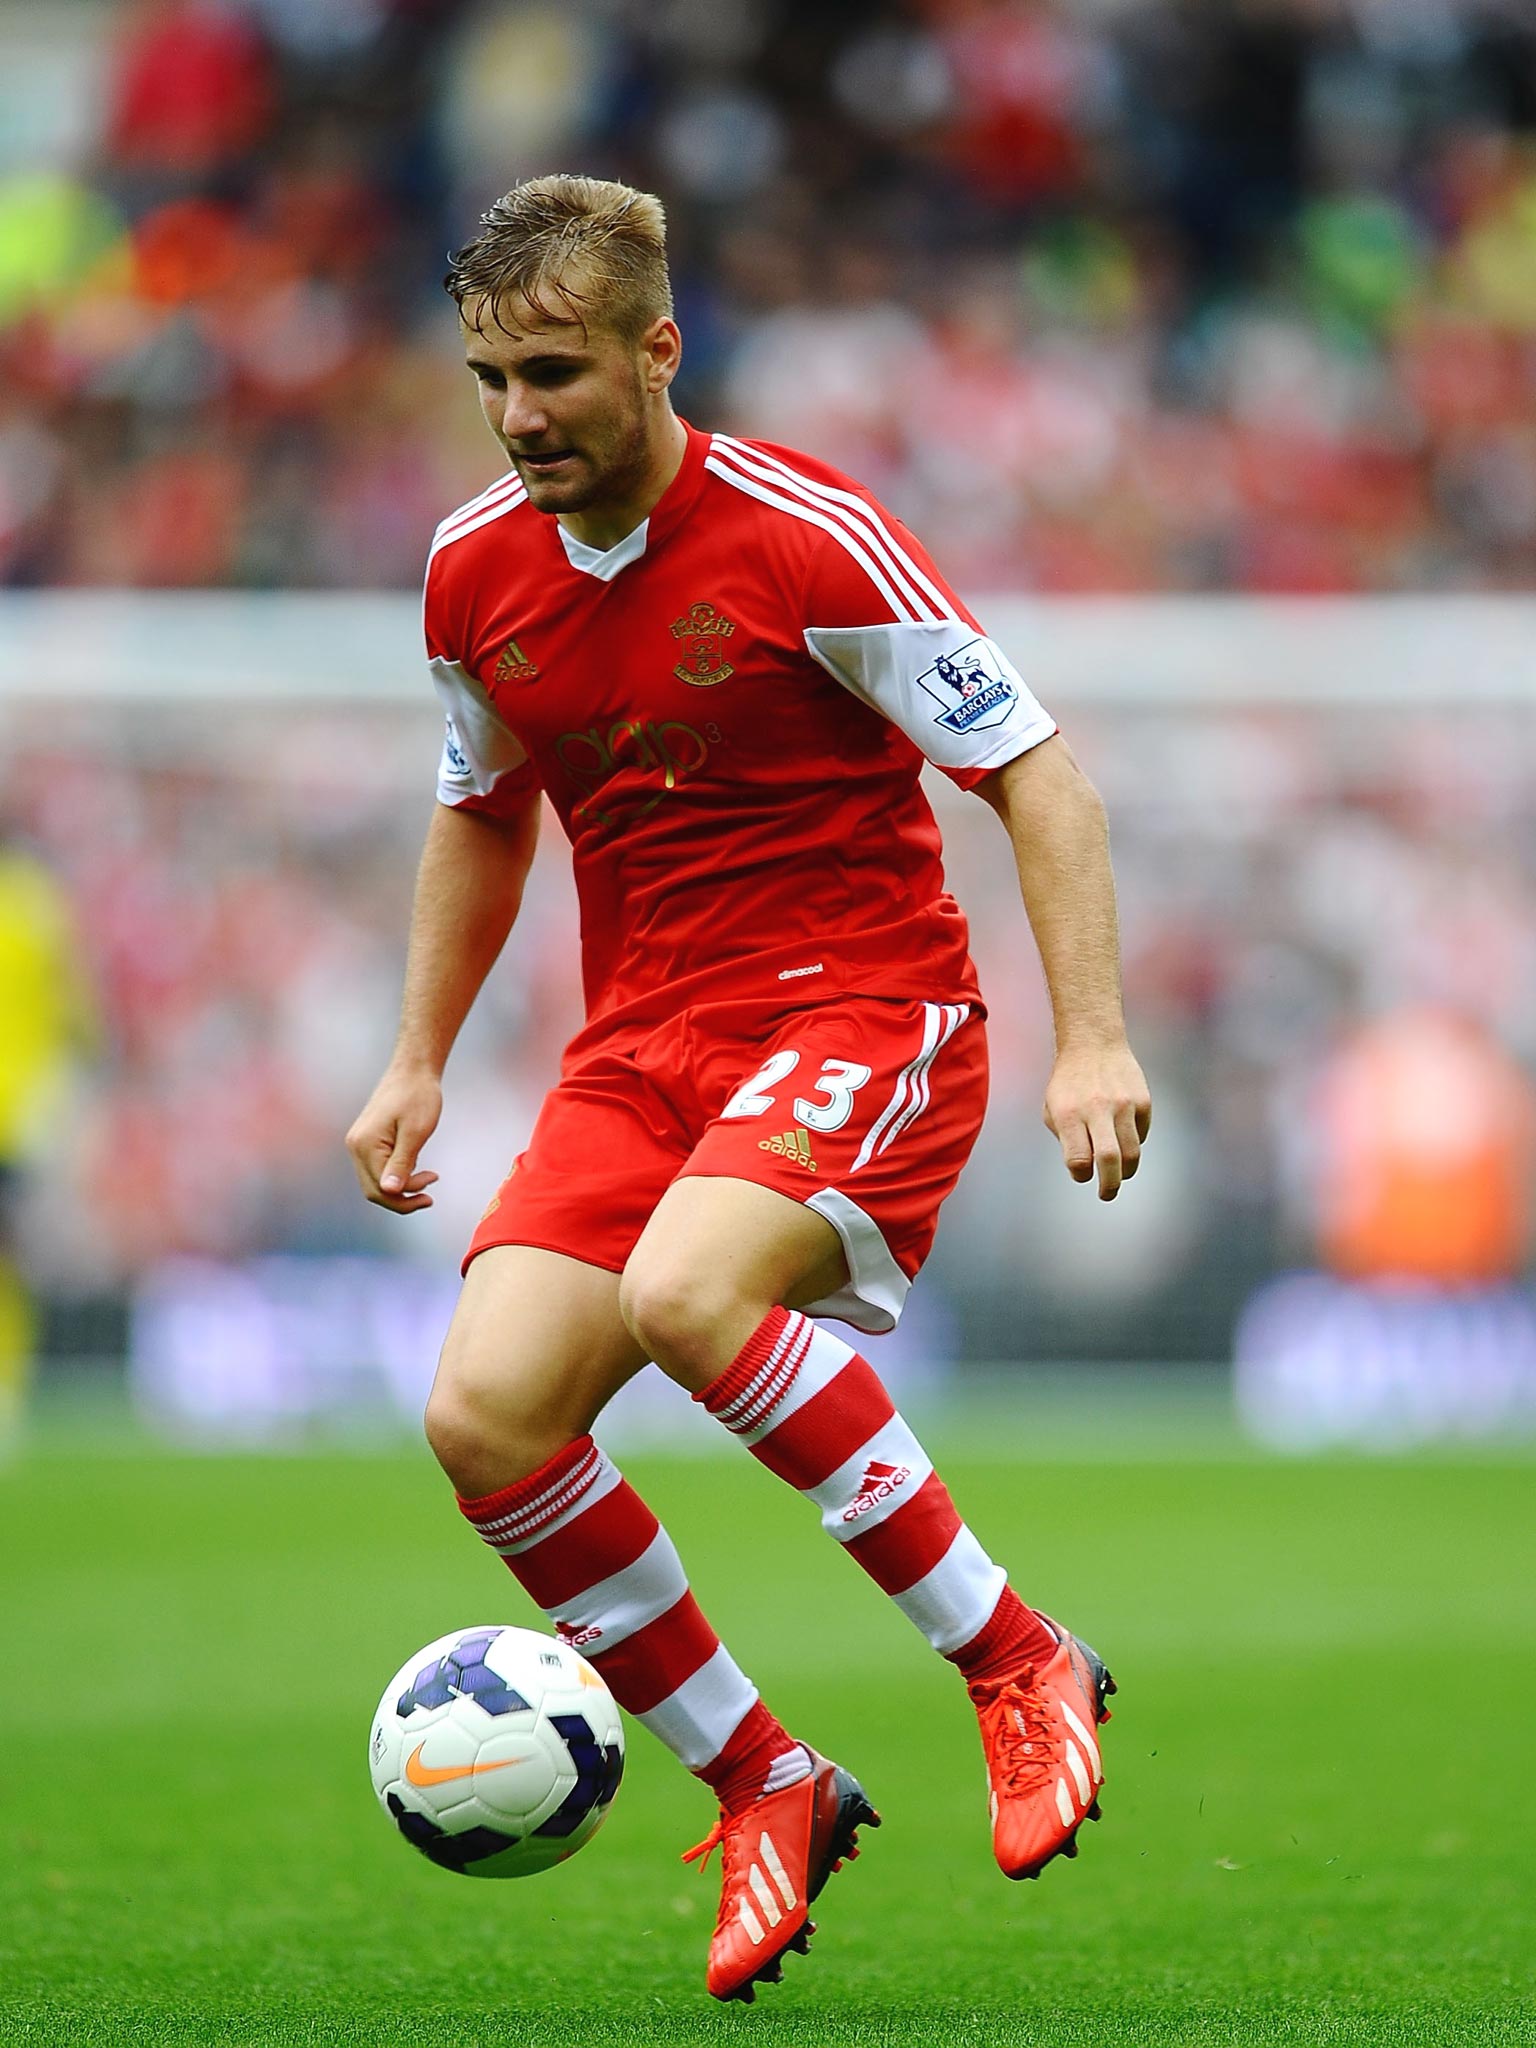 Southampton left-back Luke Shaw could make the England shirt his own in future and be partnered on the right flank by Nathaniel Clyne or Kyle Walker, both of whom I’ve worked with